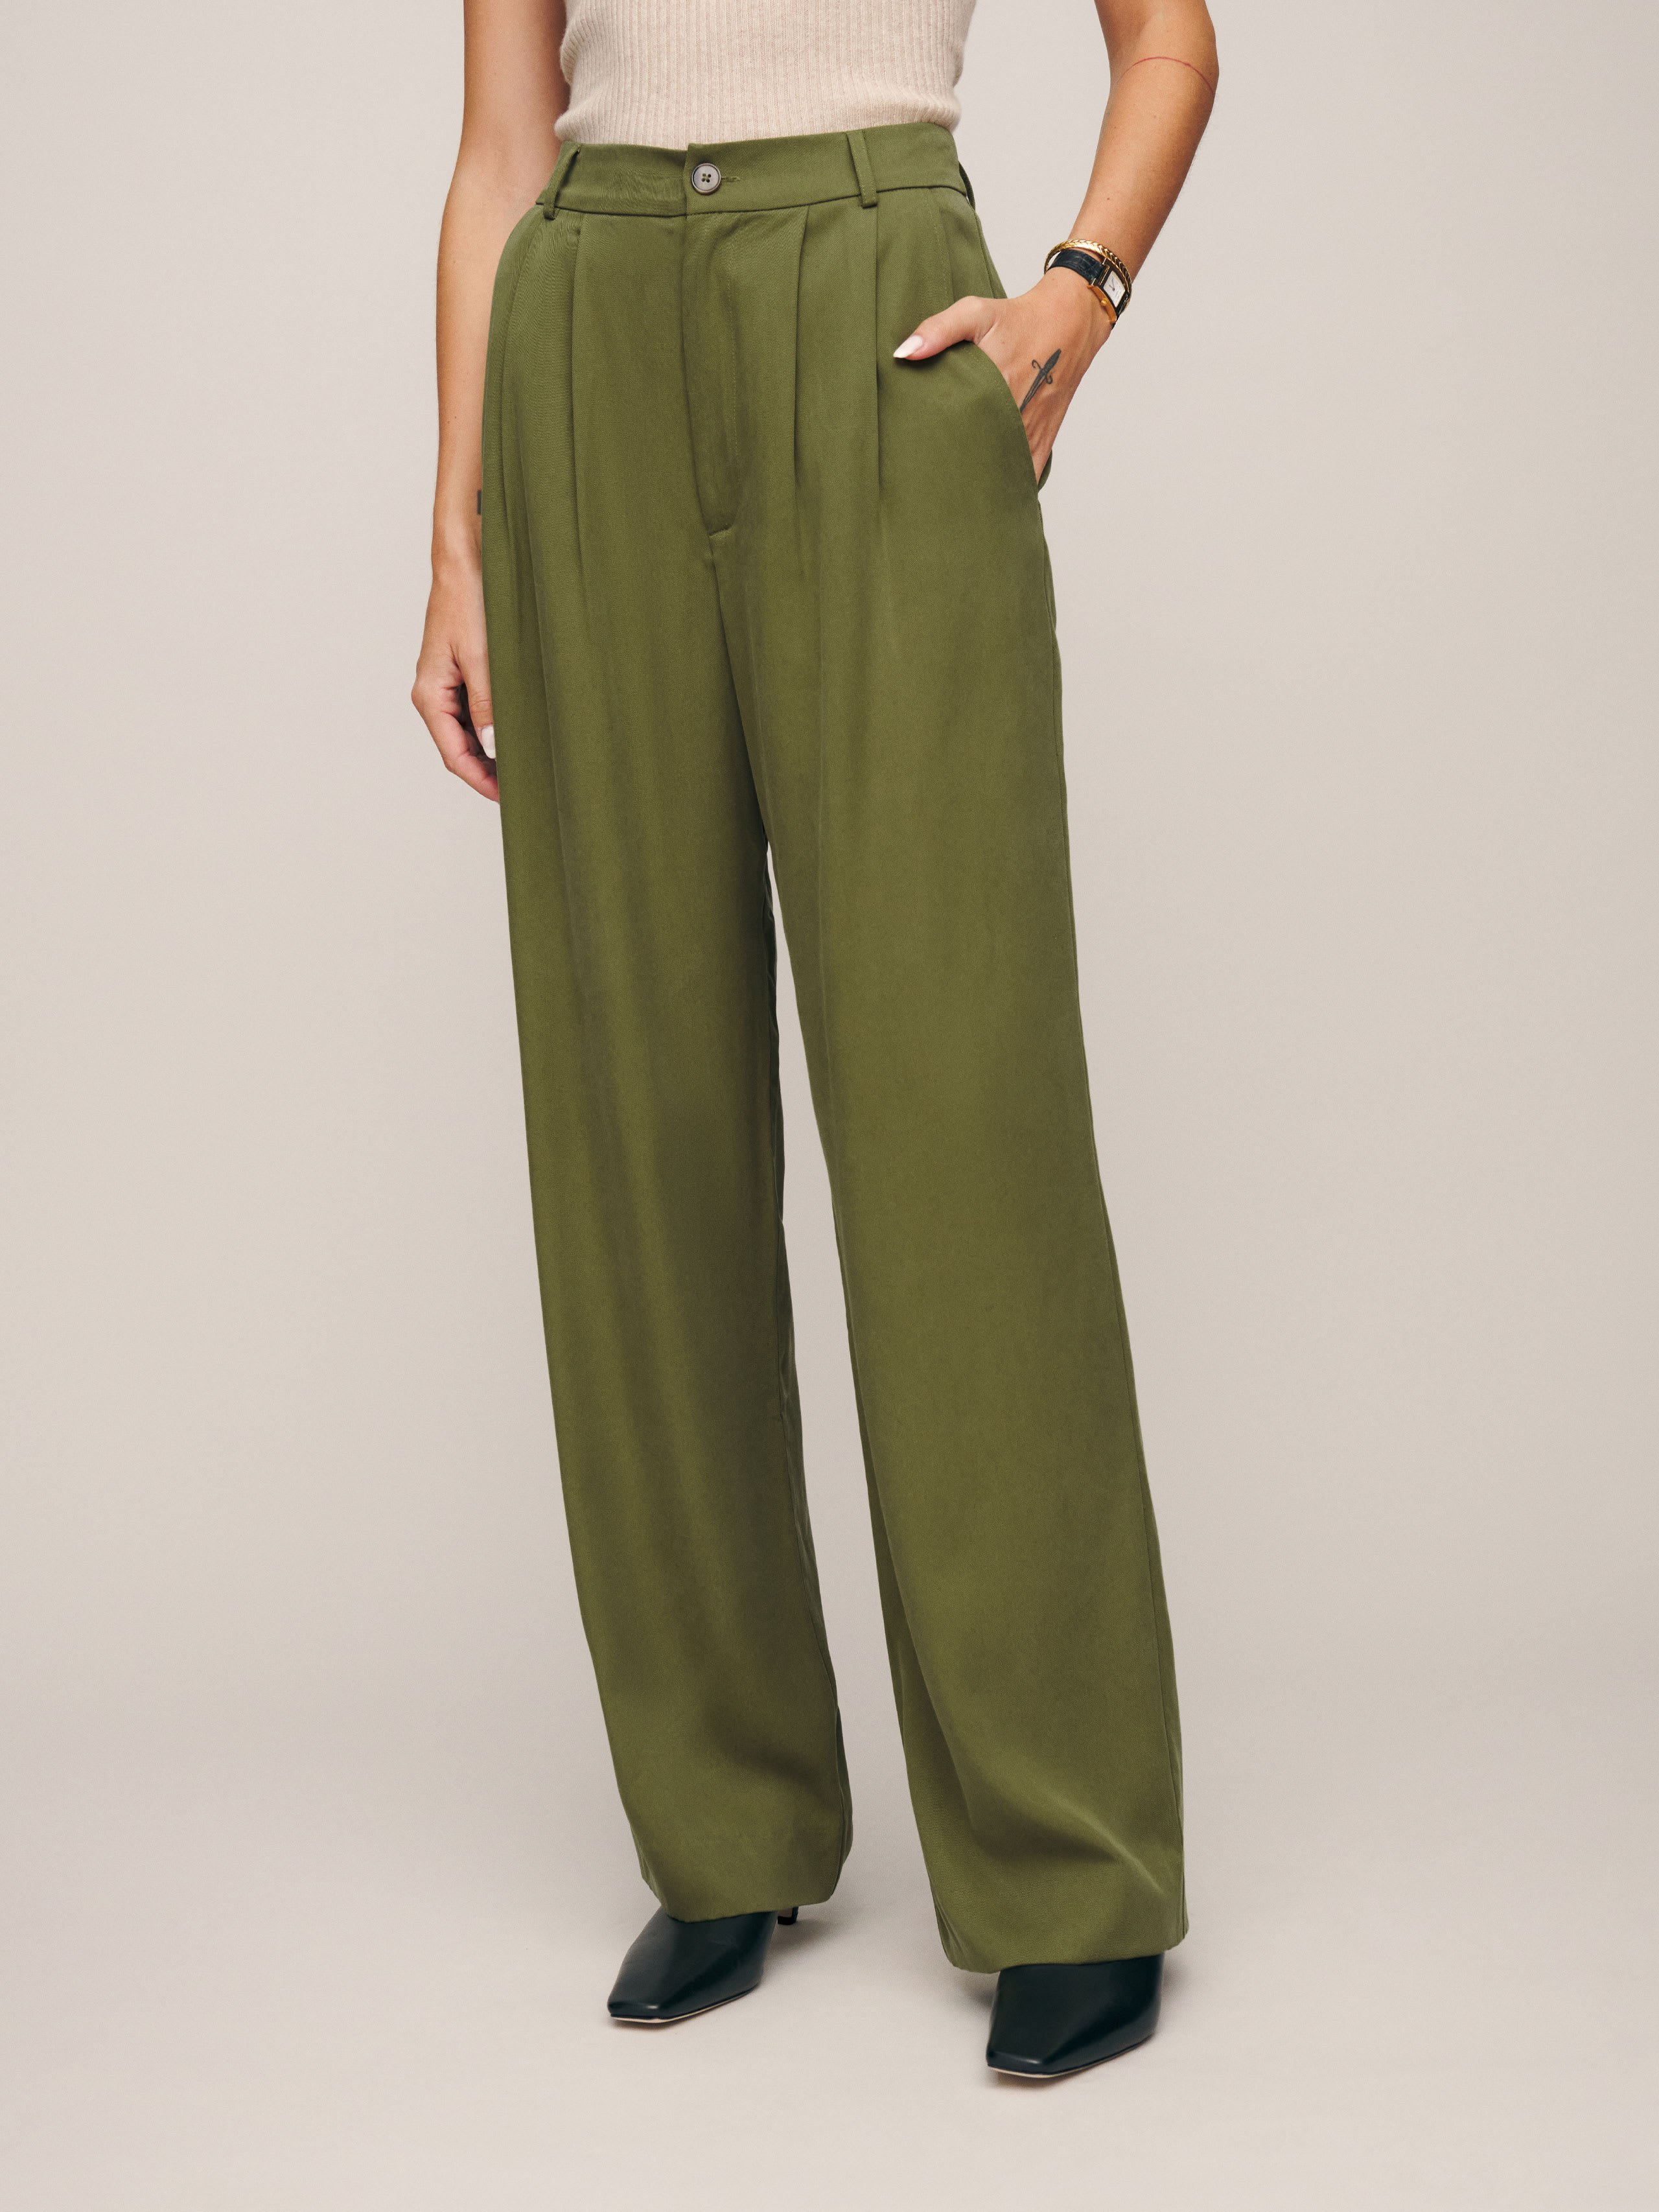 Reformation Petites Mason Pant In Pear